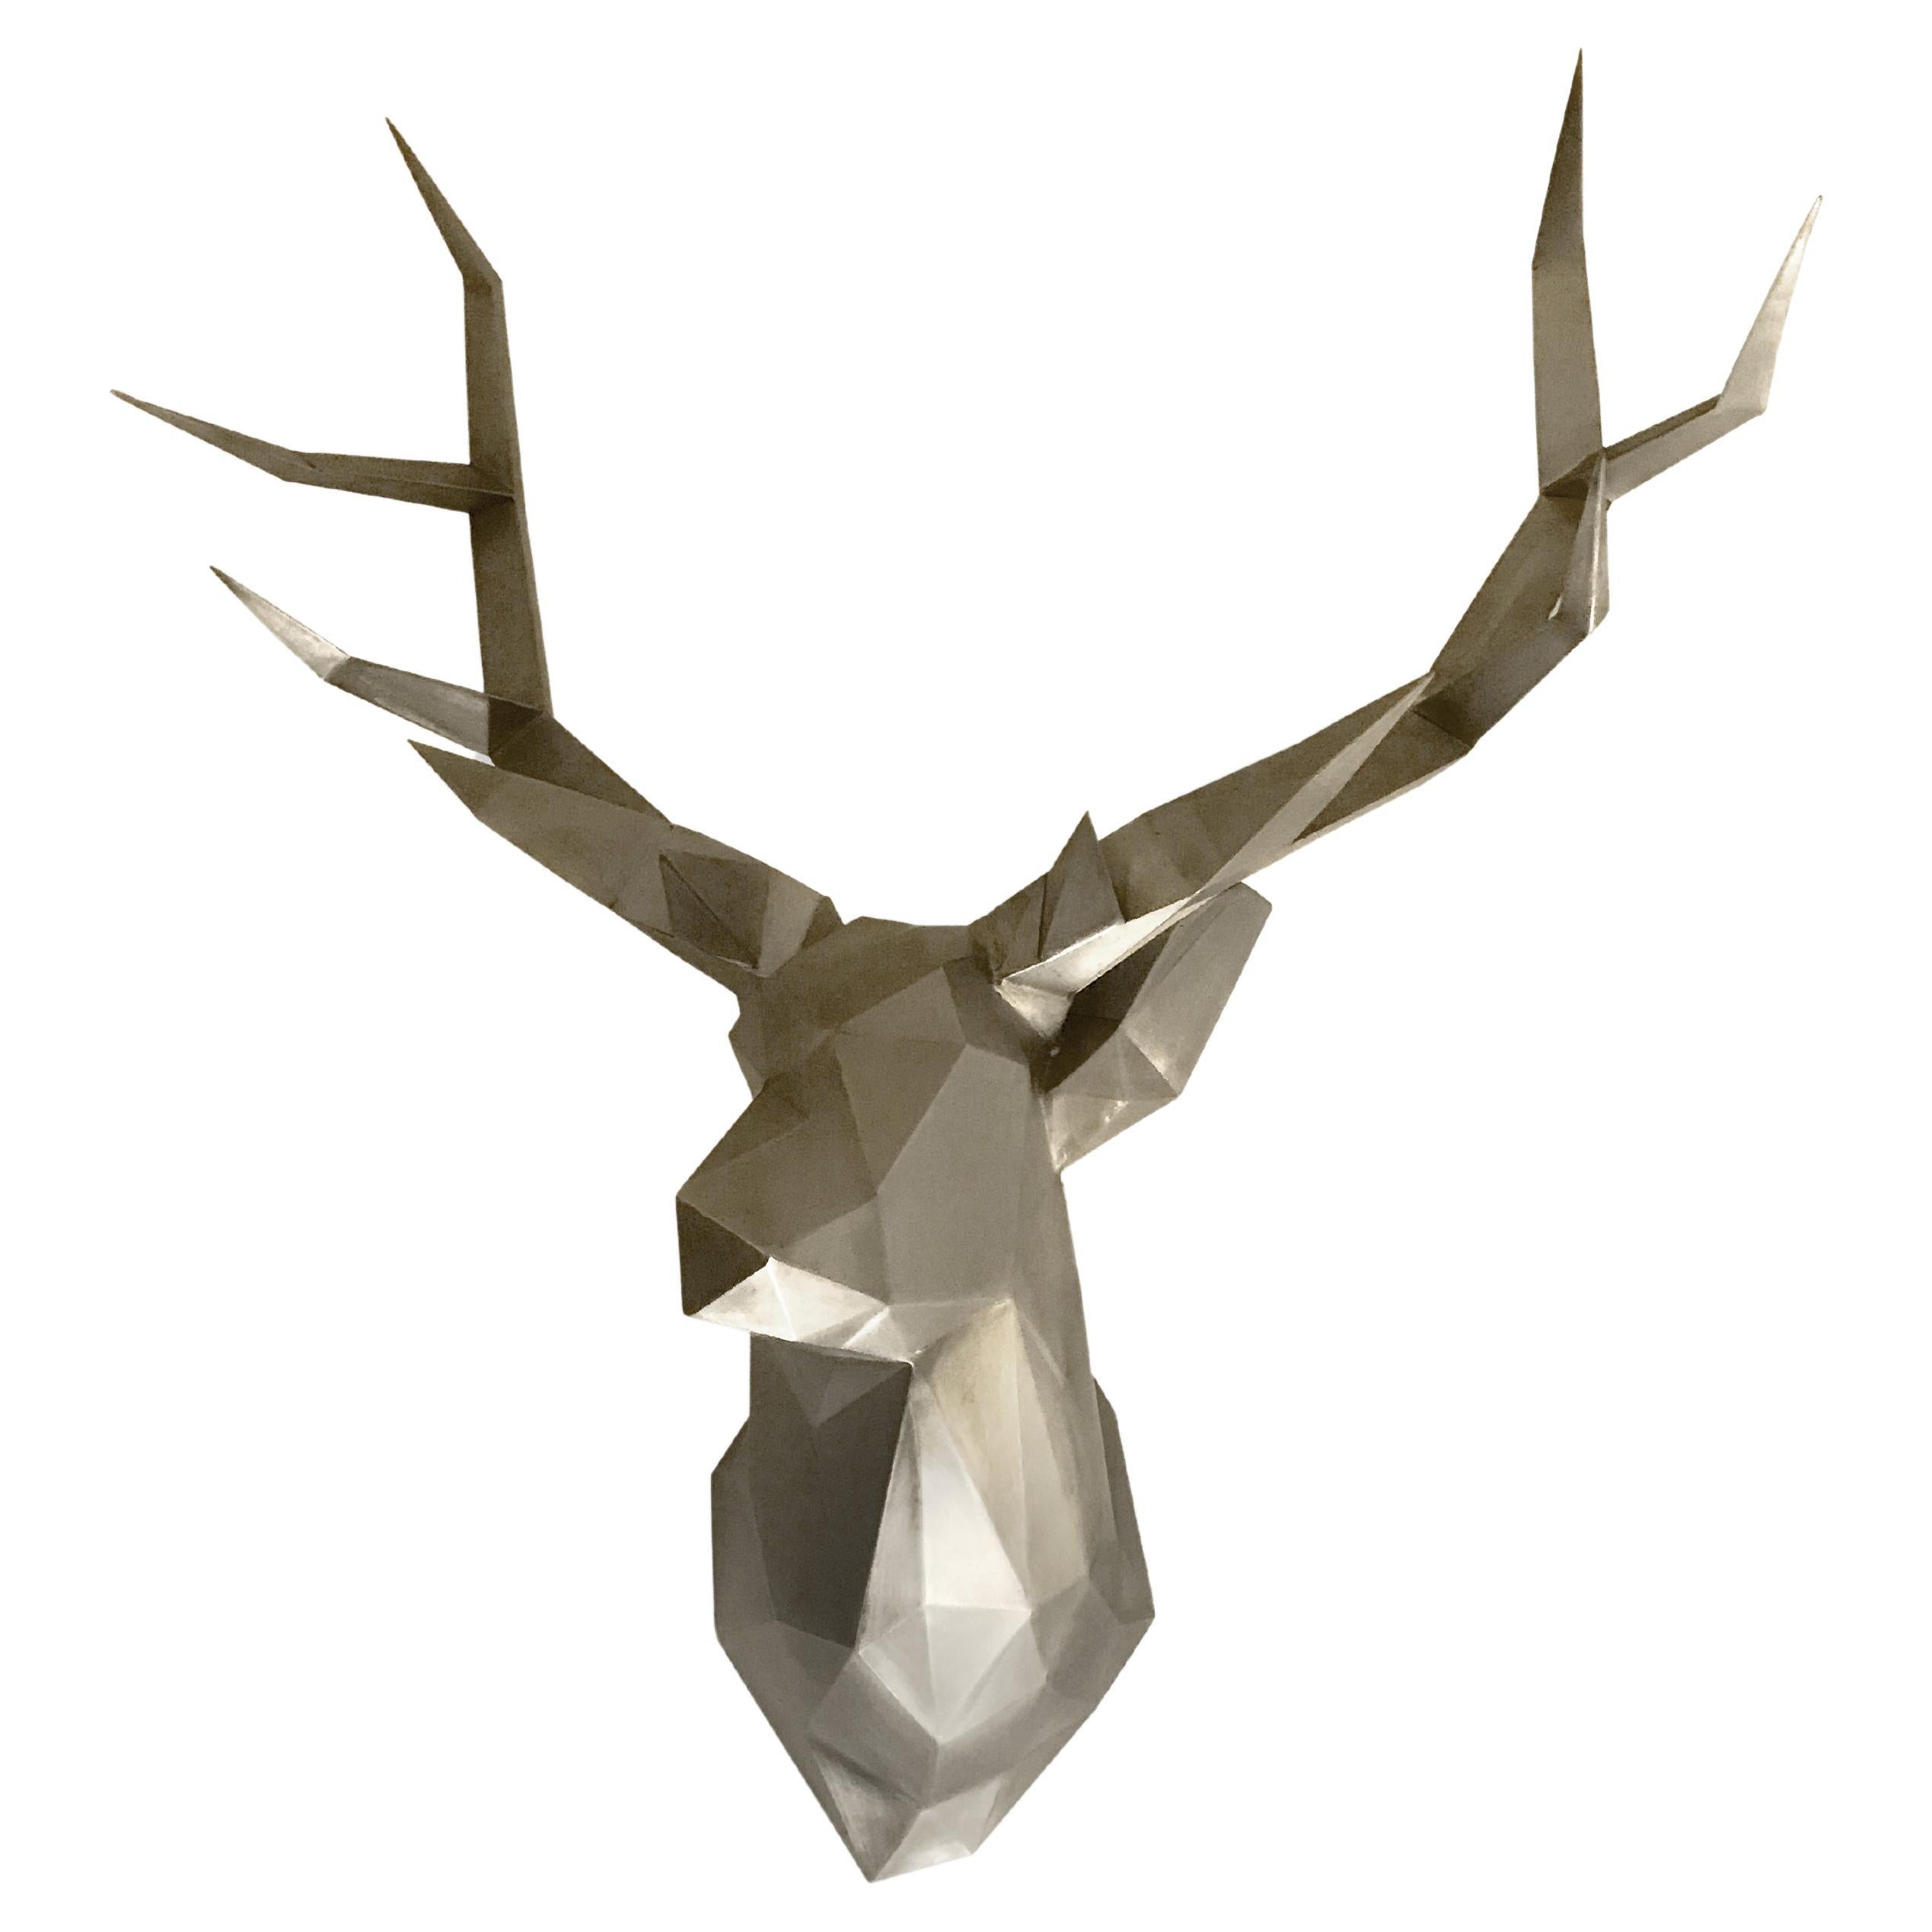 How do I mount elk antlers on a wall?